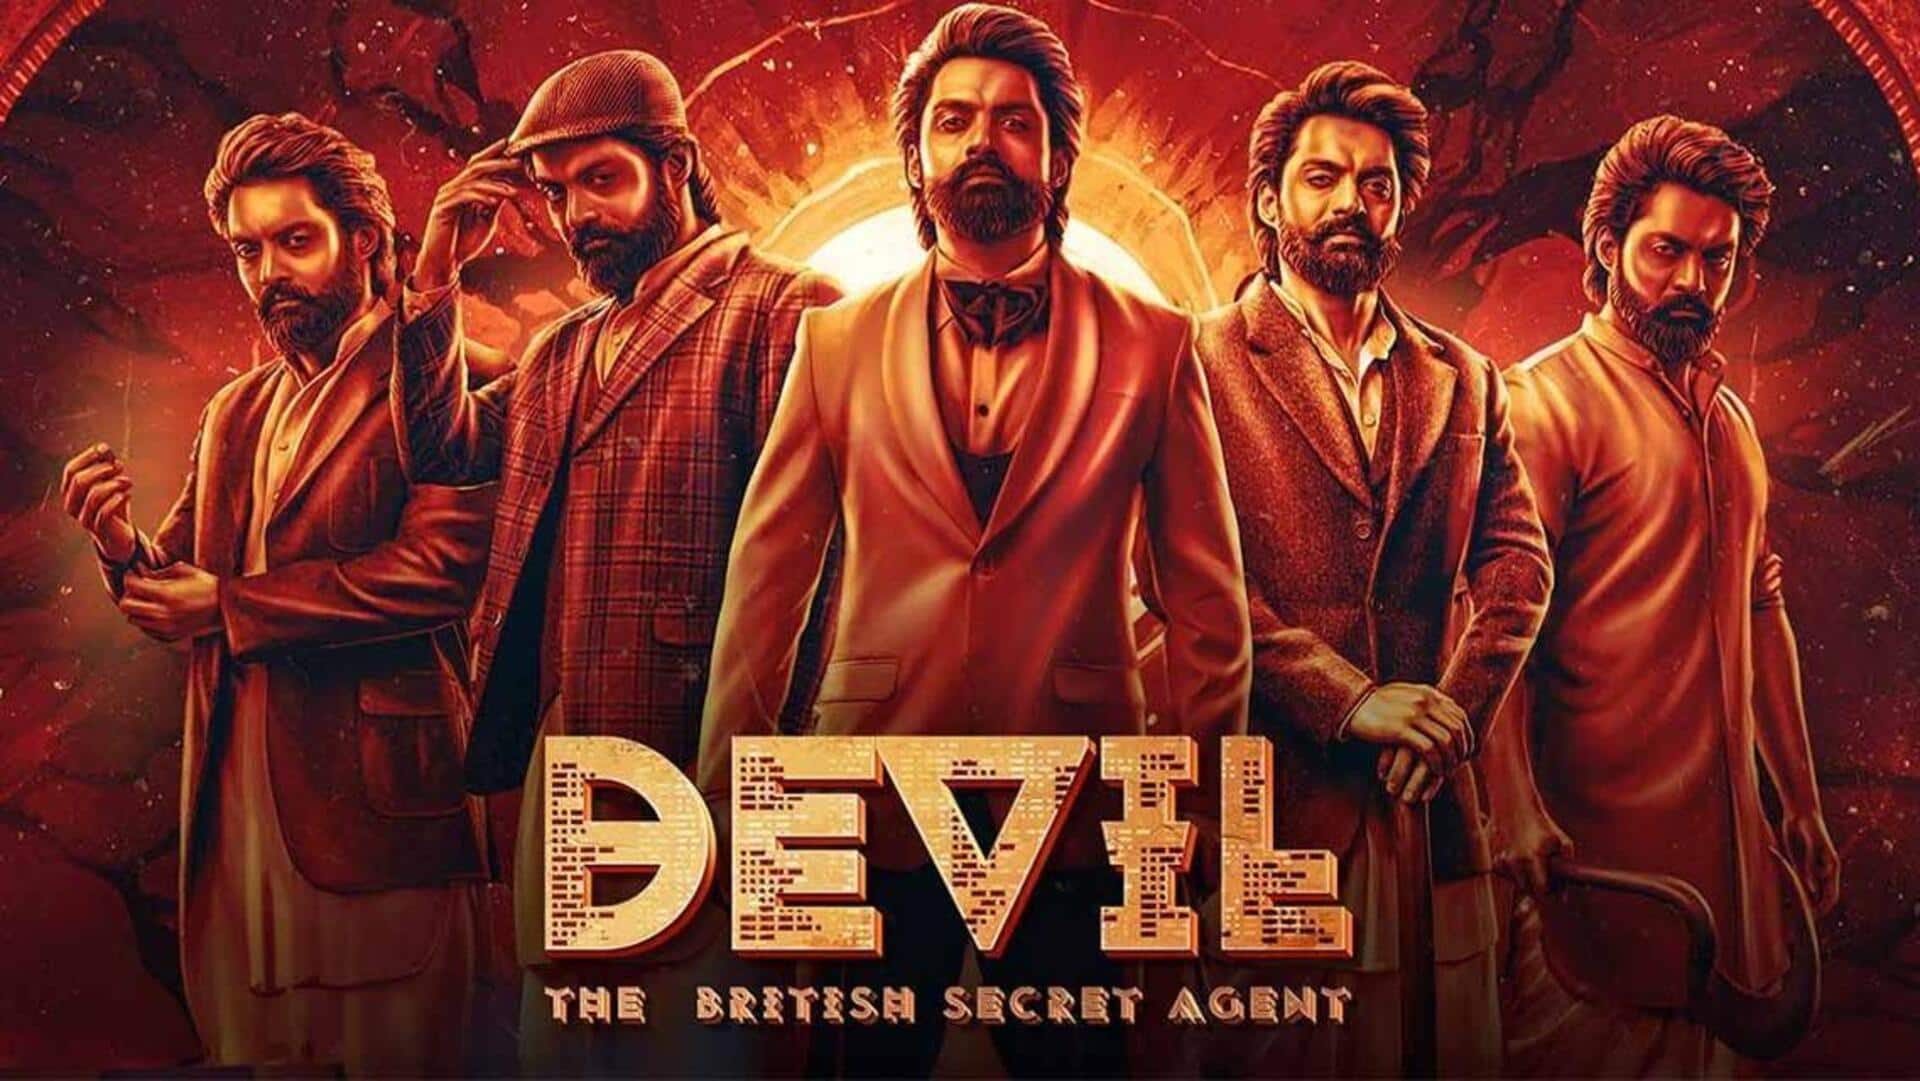 Box office collection: 'Devil' to exit theaters soon